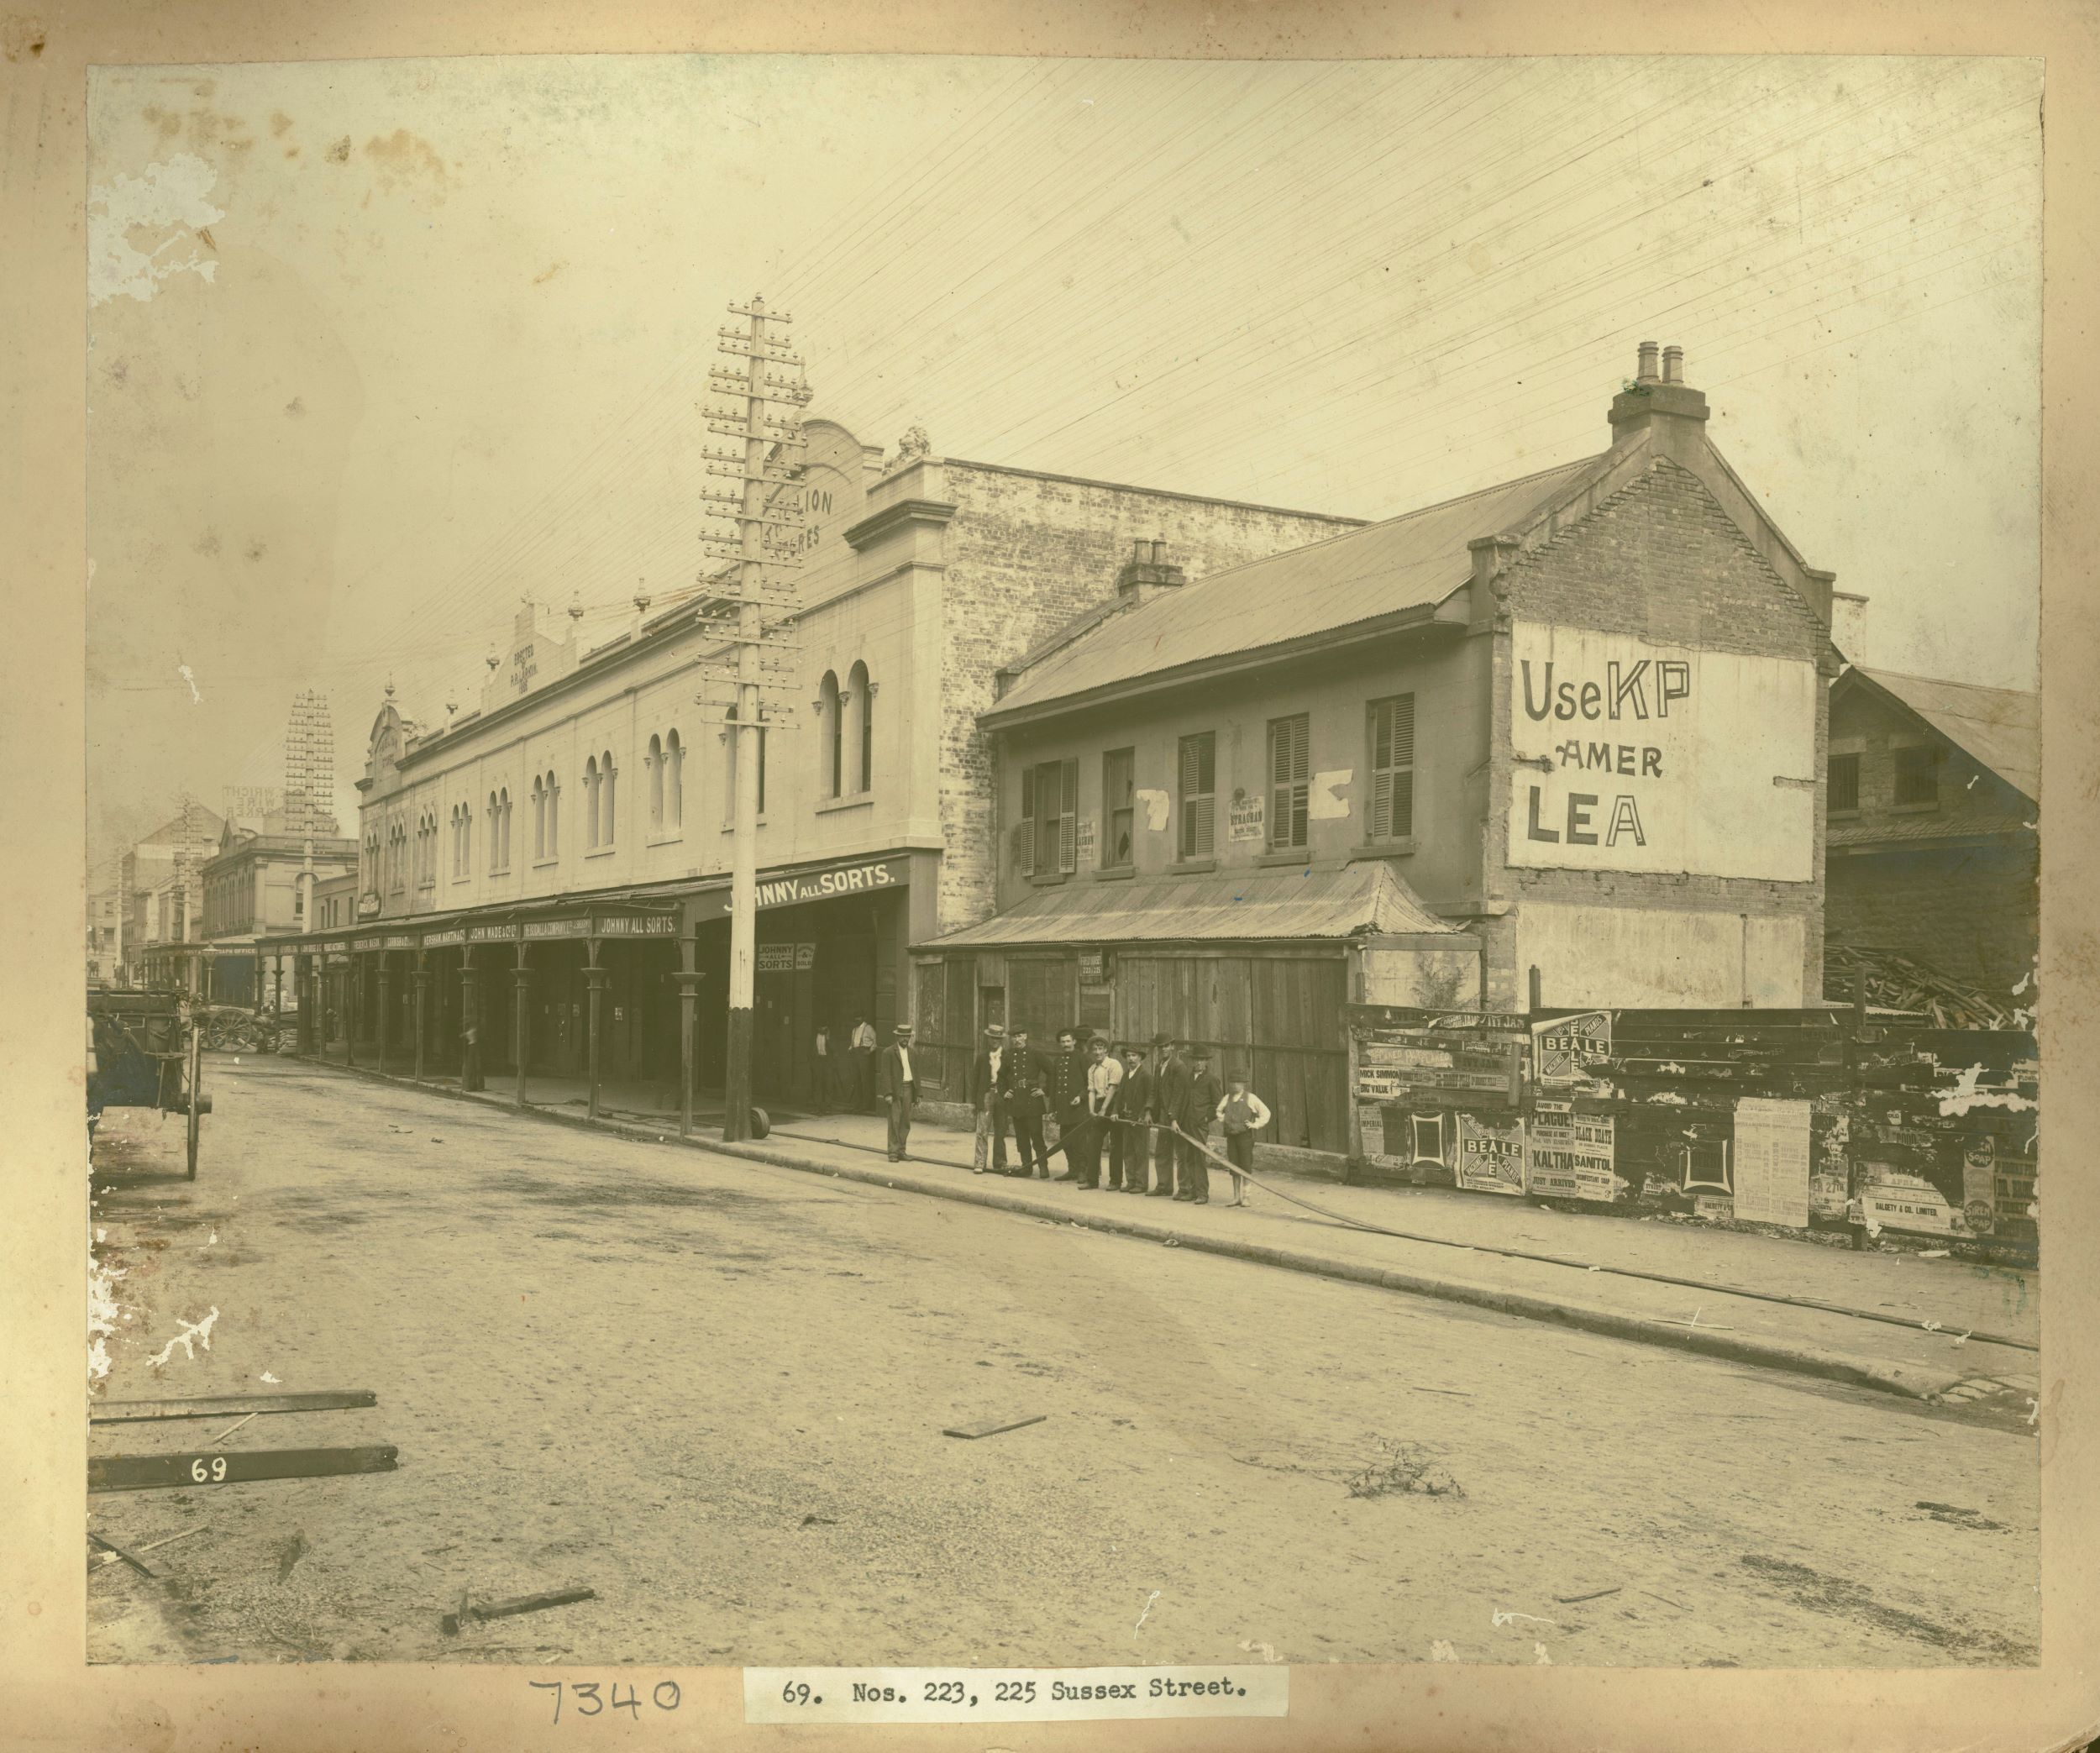 A Sydney street with a dirt road and a group of men stand in front of a row of shops with a hose